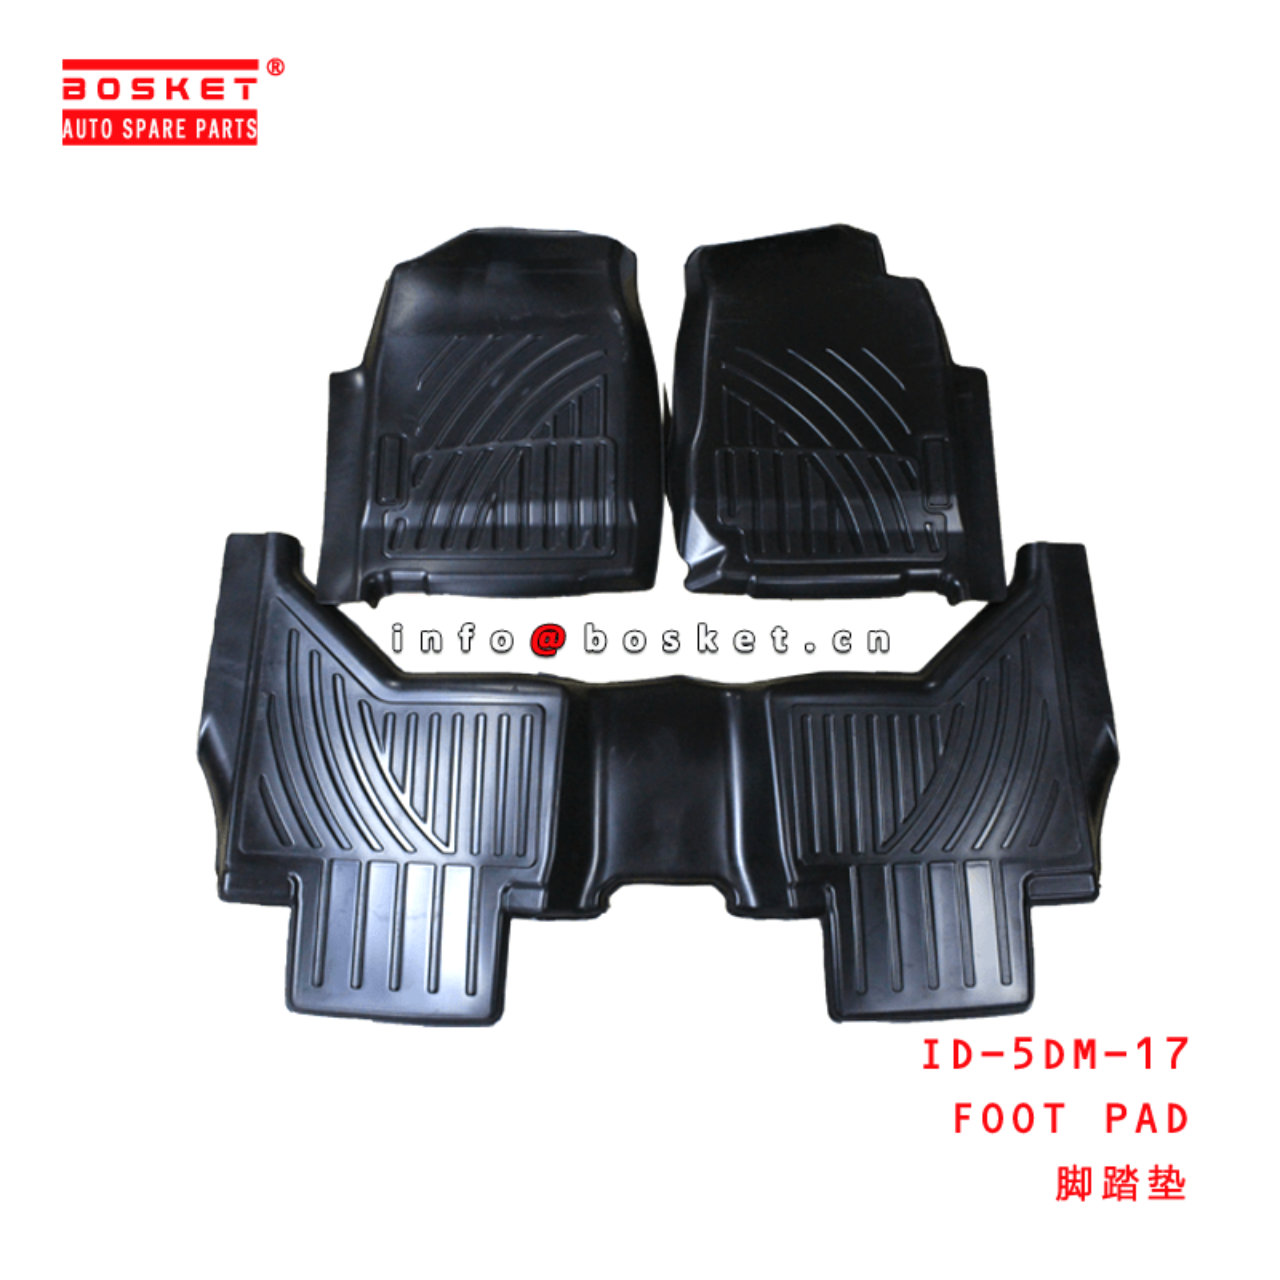  ID-5DM-17 Foot pad Suitable for ISUZU D-MAX 2017